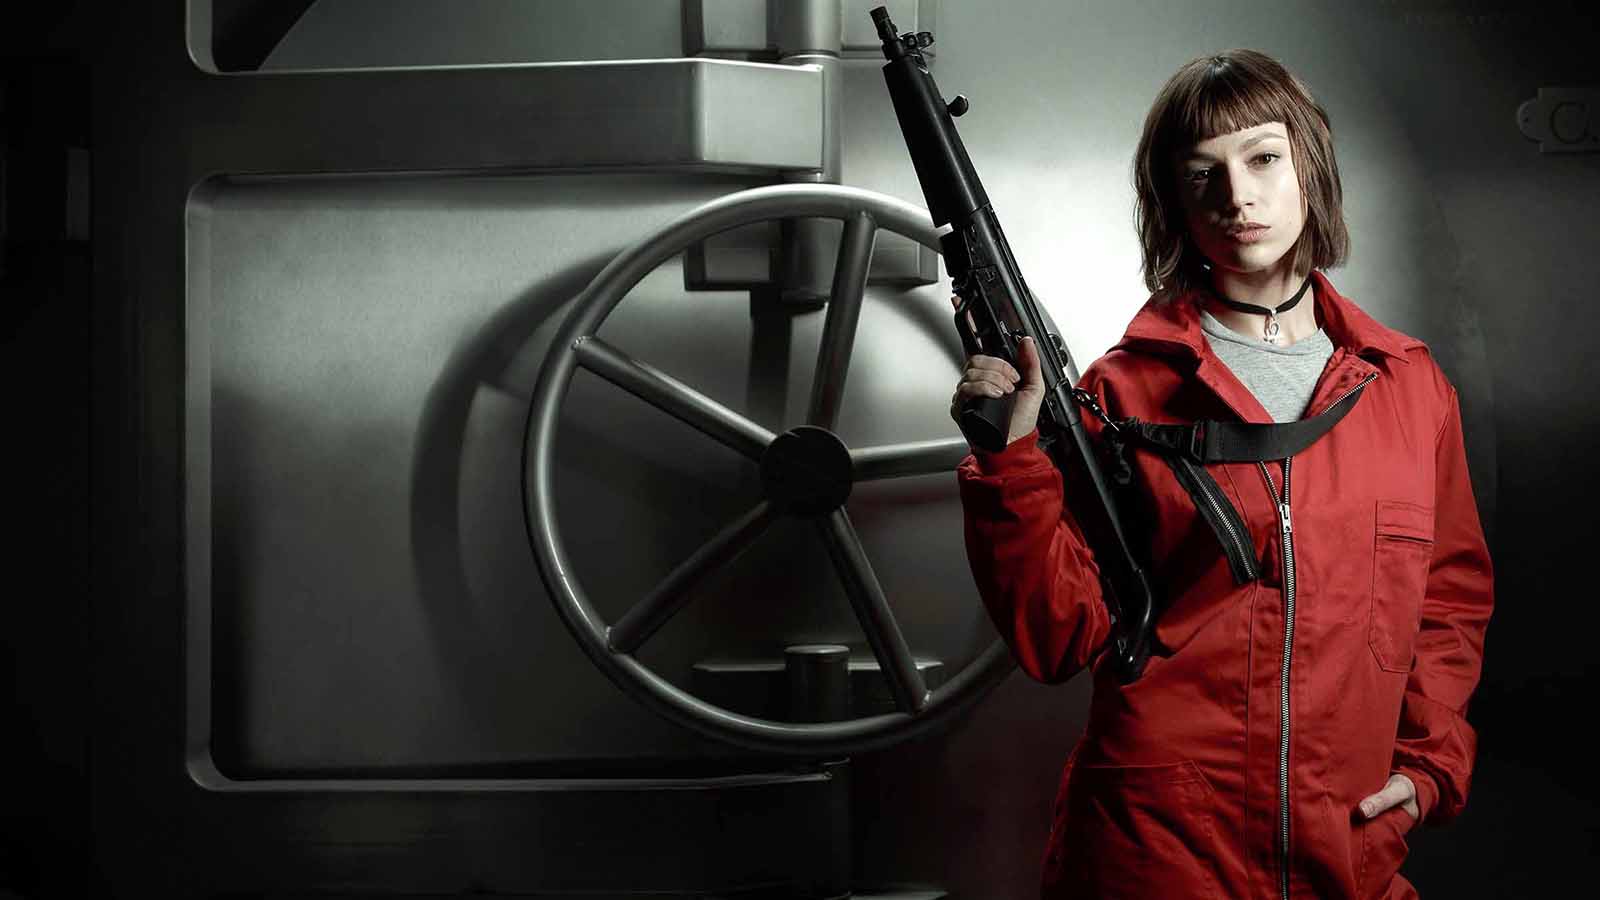 As production continues on Netflix's 'Money Heist', fans are worried for the ending of the show. Here's what creator Alex Pena says about the show. 